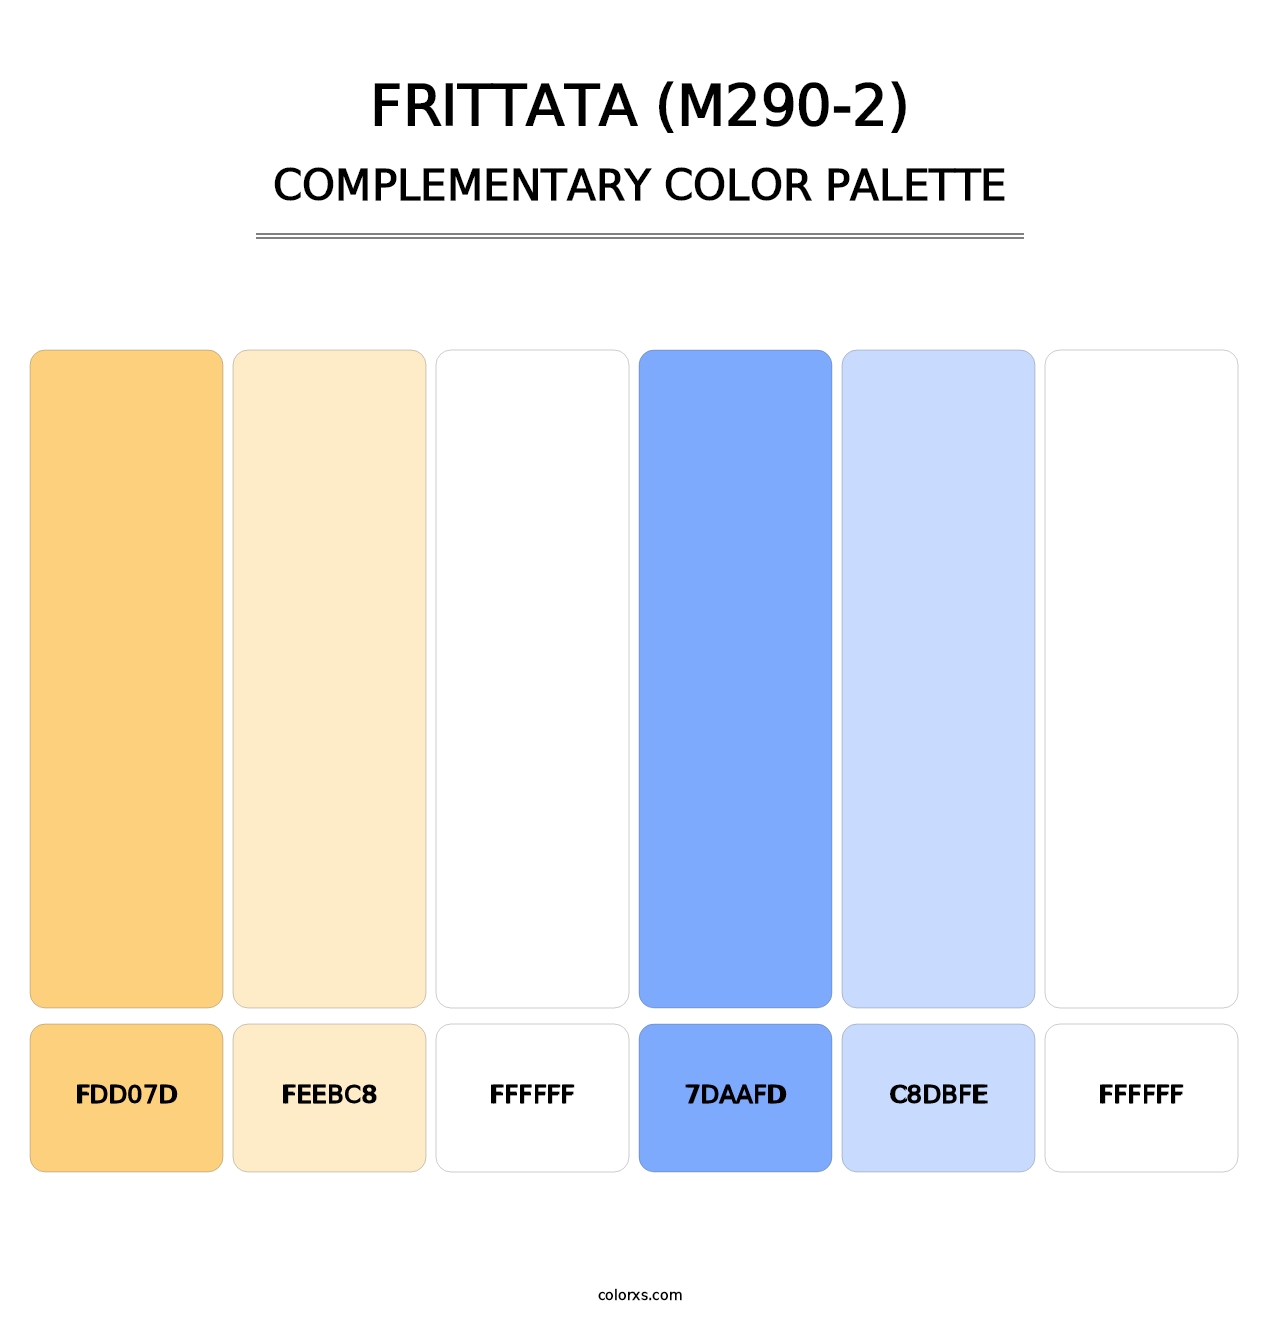 Frittata (M290-2) - Complementary Color Palette